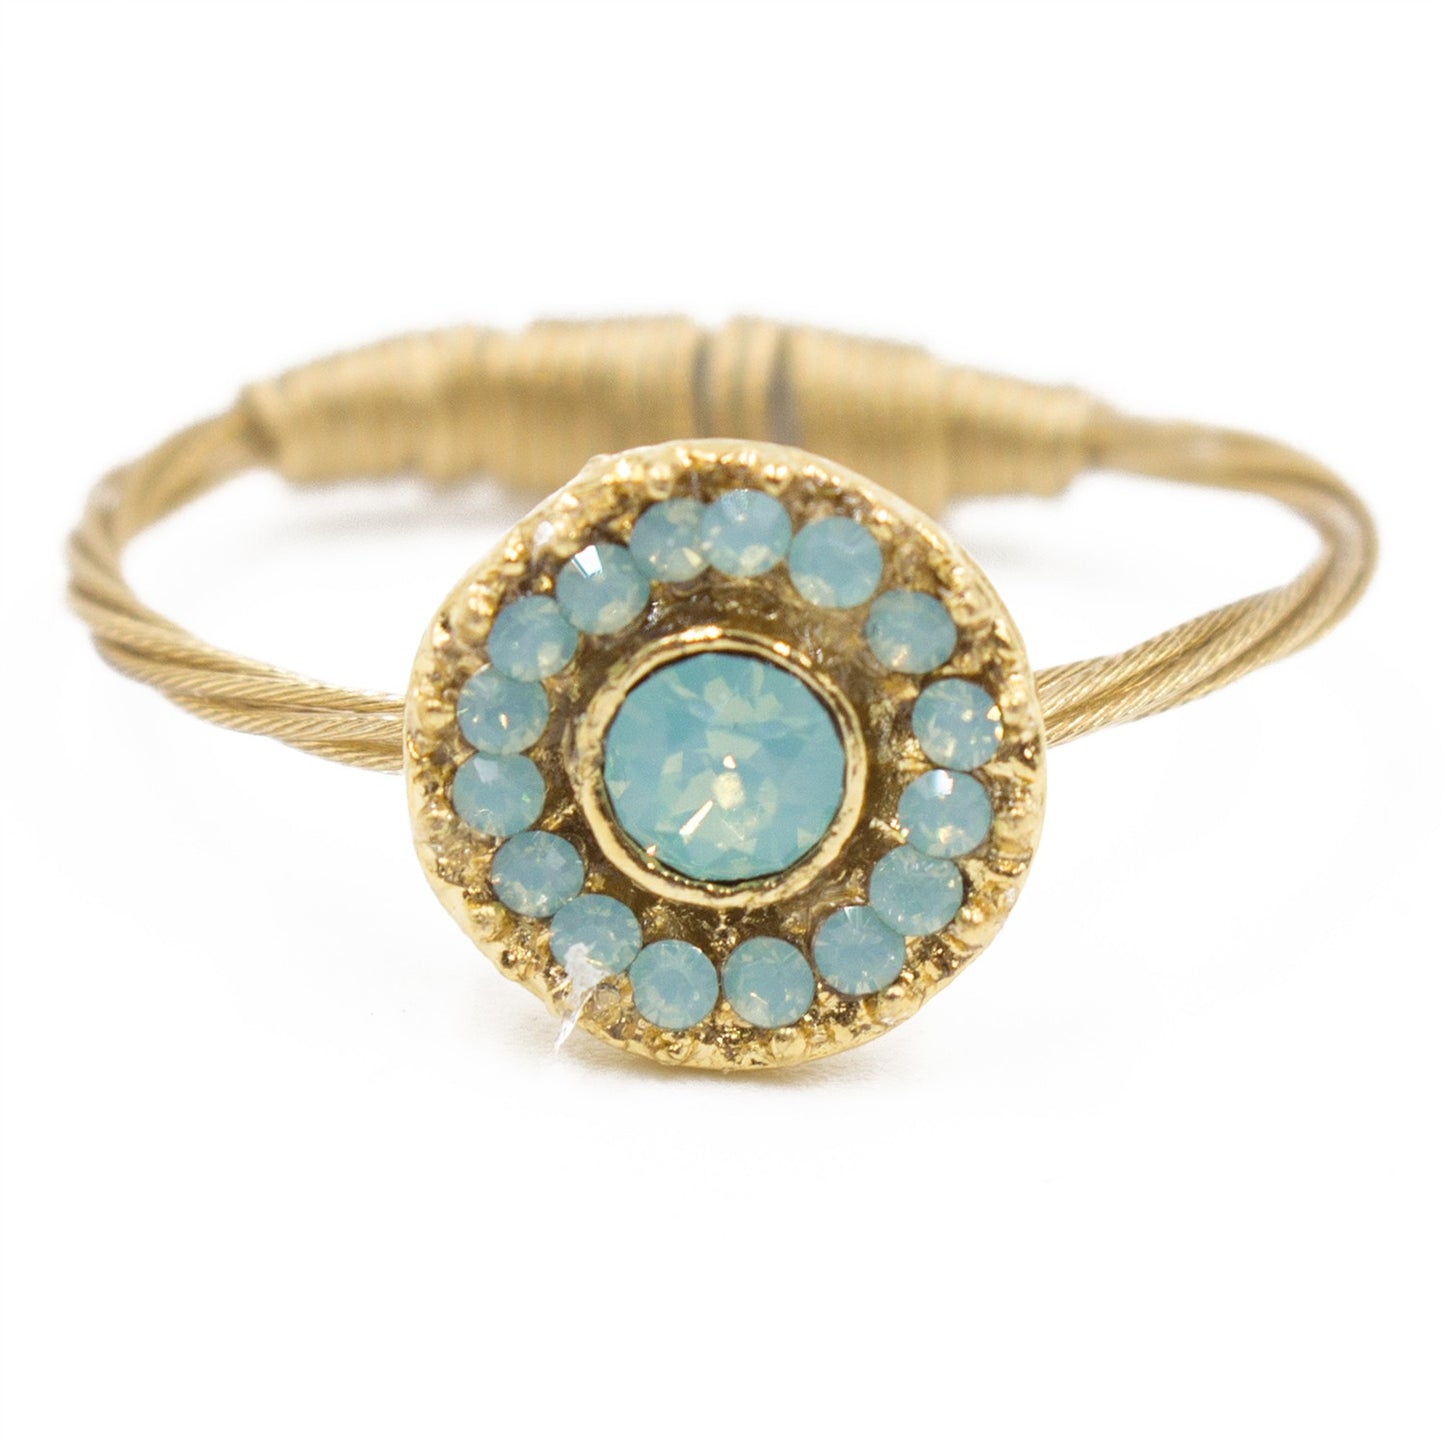 Exceptional Ring 9063: Opal Turq/ Gold